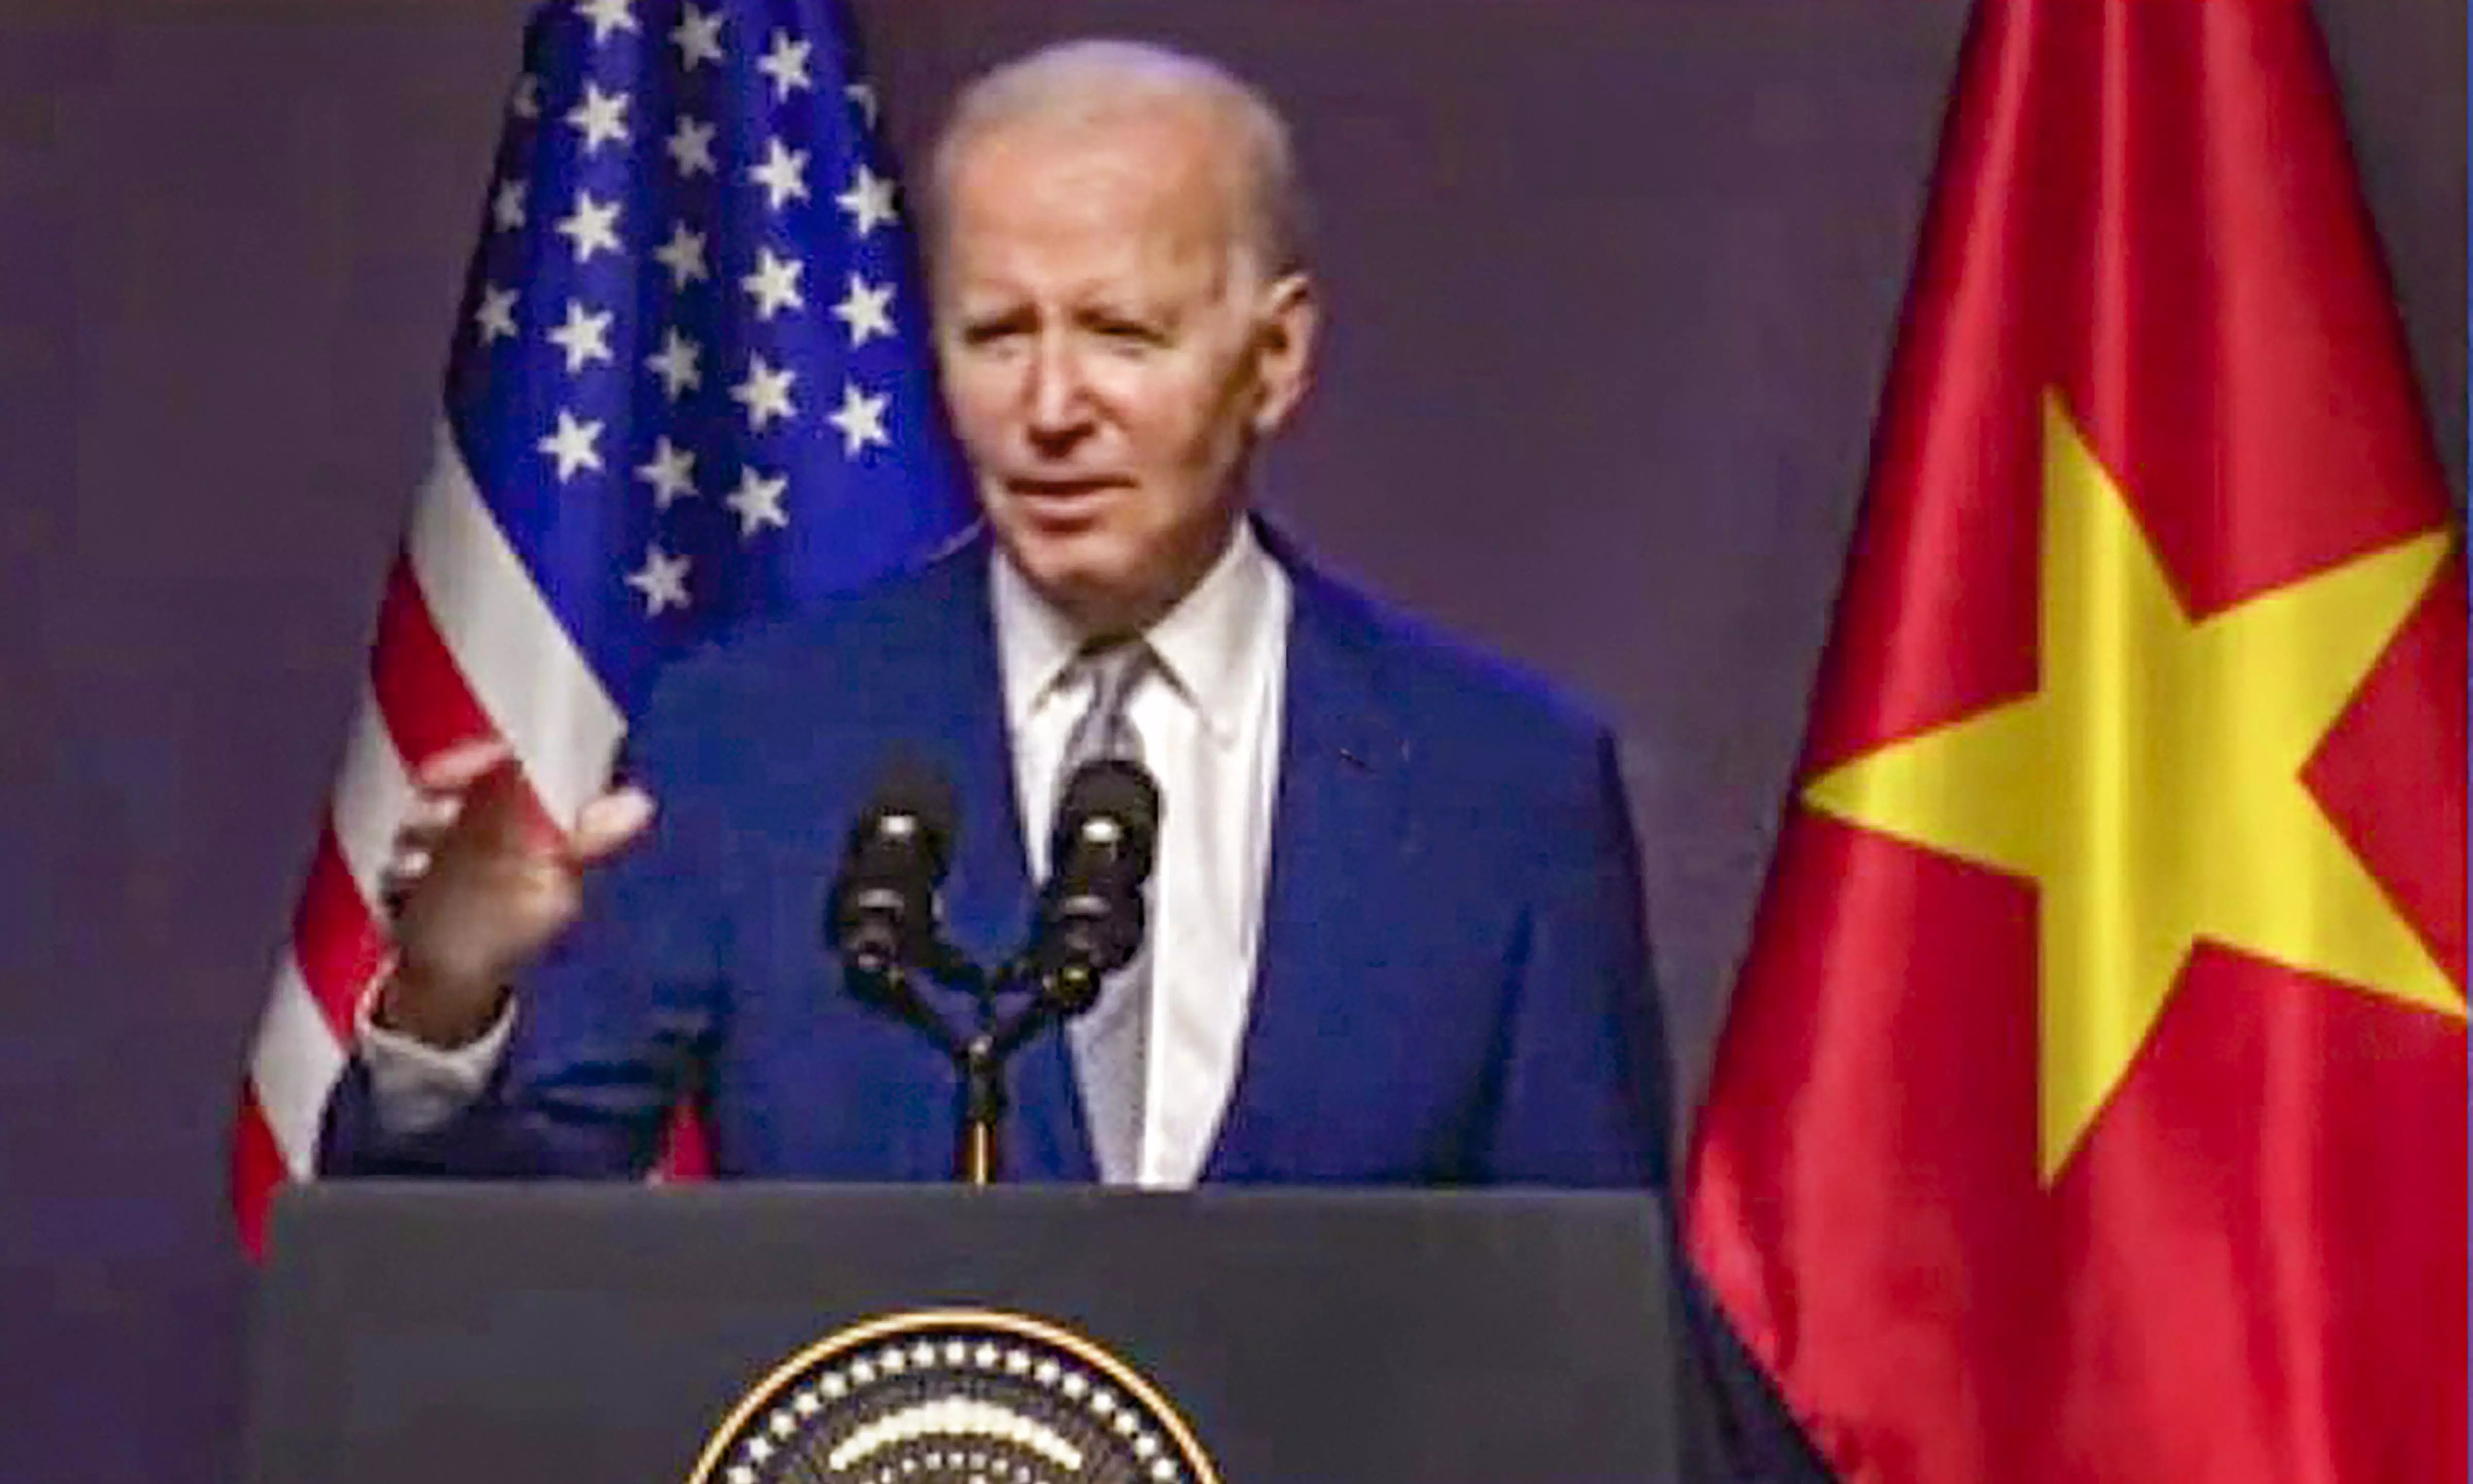 Discussed human rights, press freedom with Modi, says Biden in Vietnam